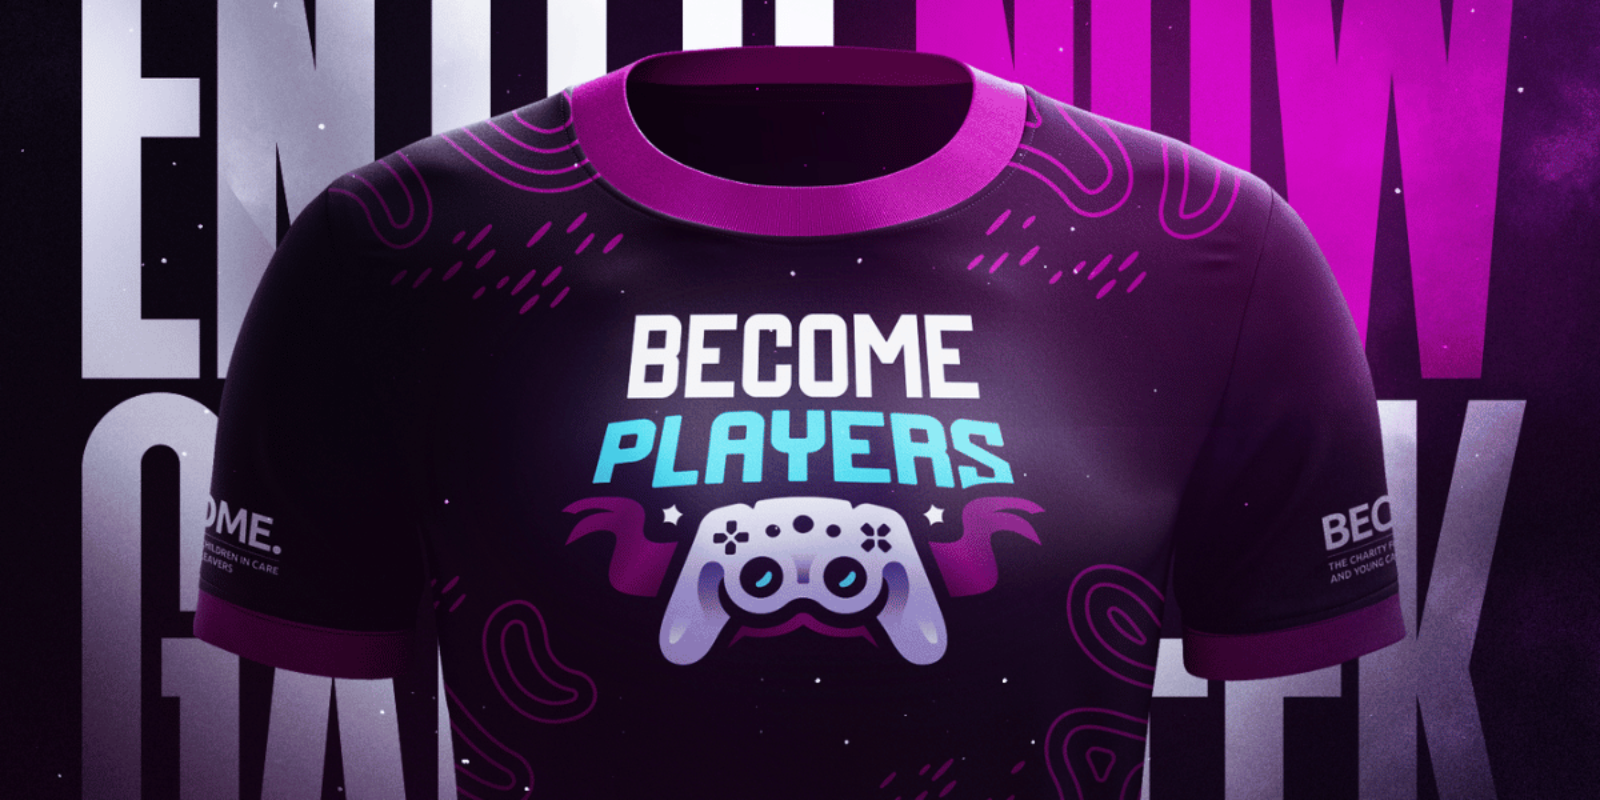 Become Players jersey with Gameweek emblem